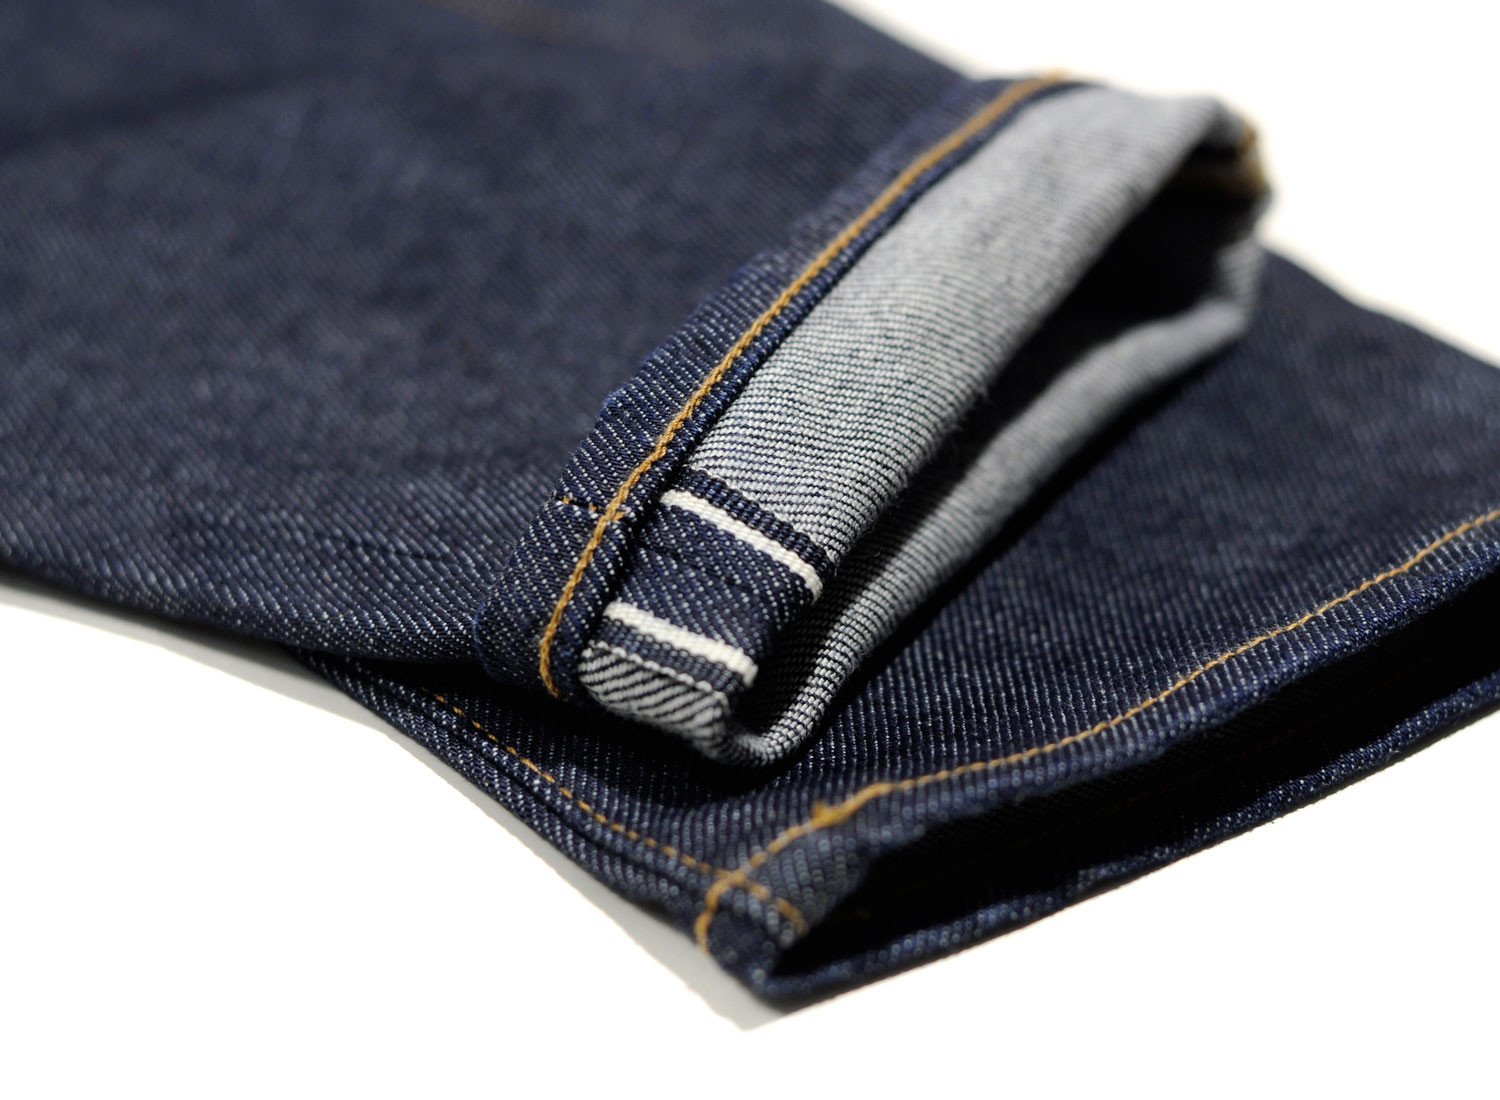 levi's made & crafted studio taper